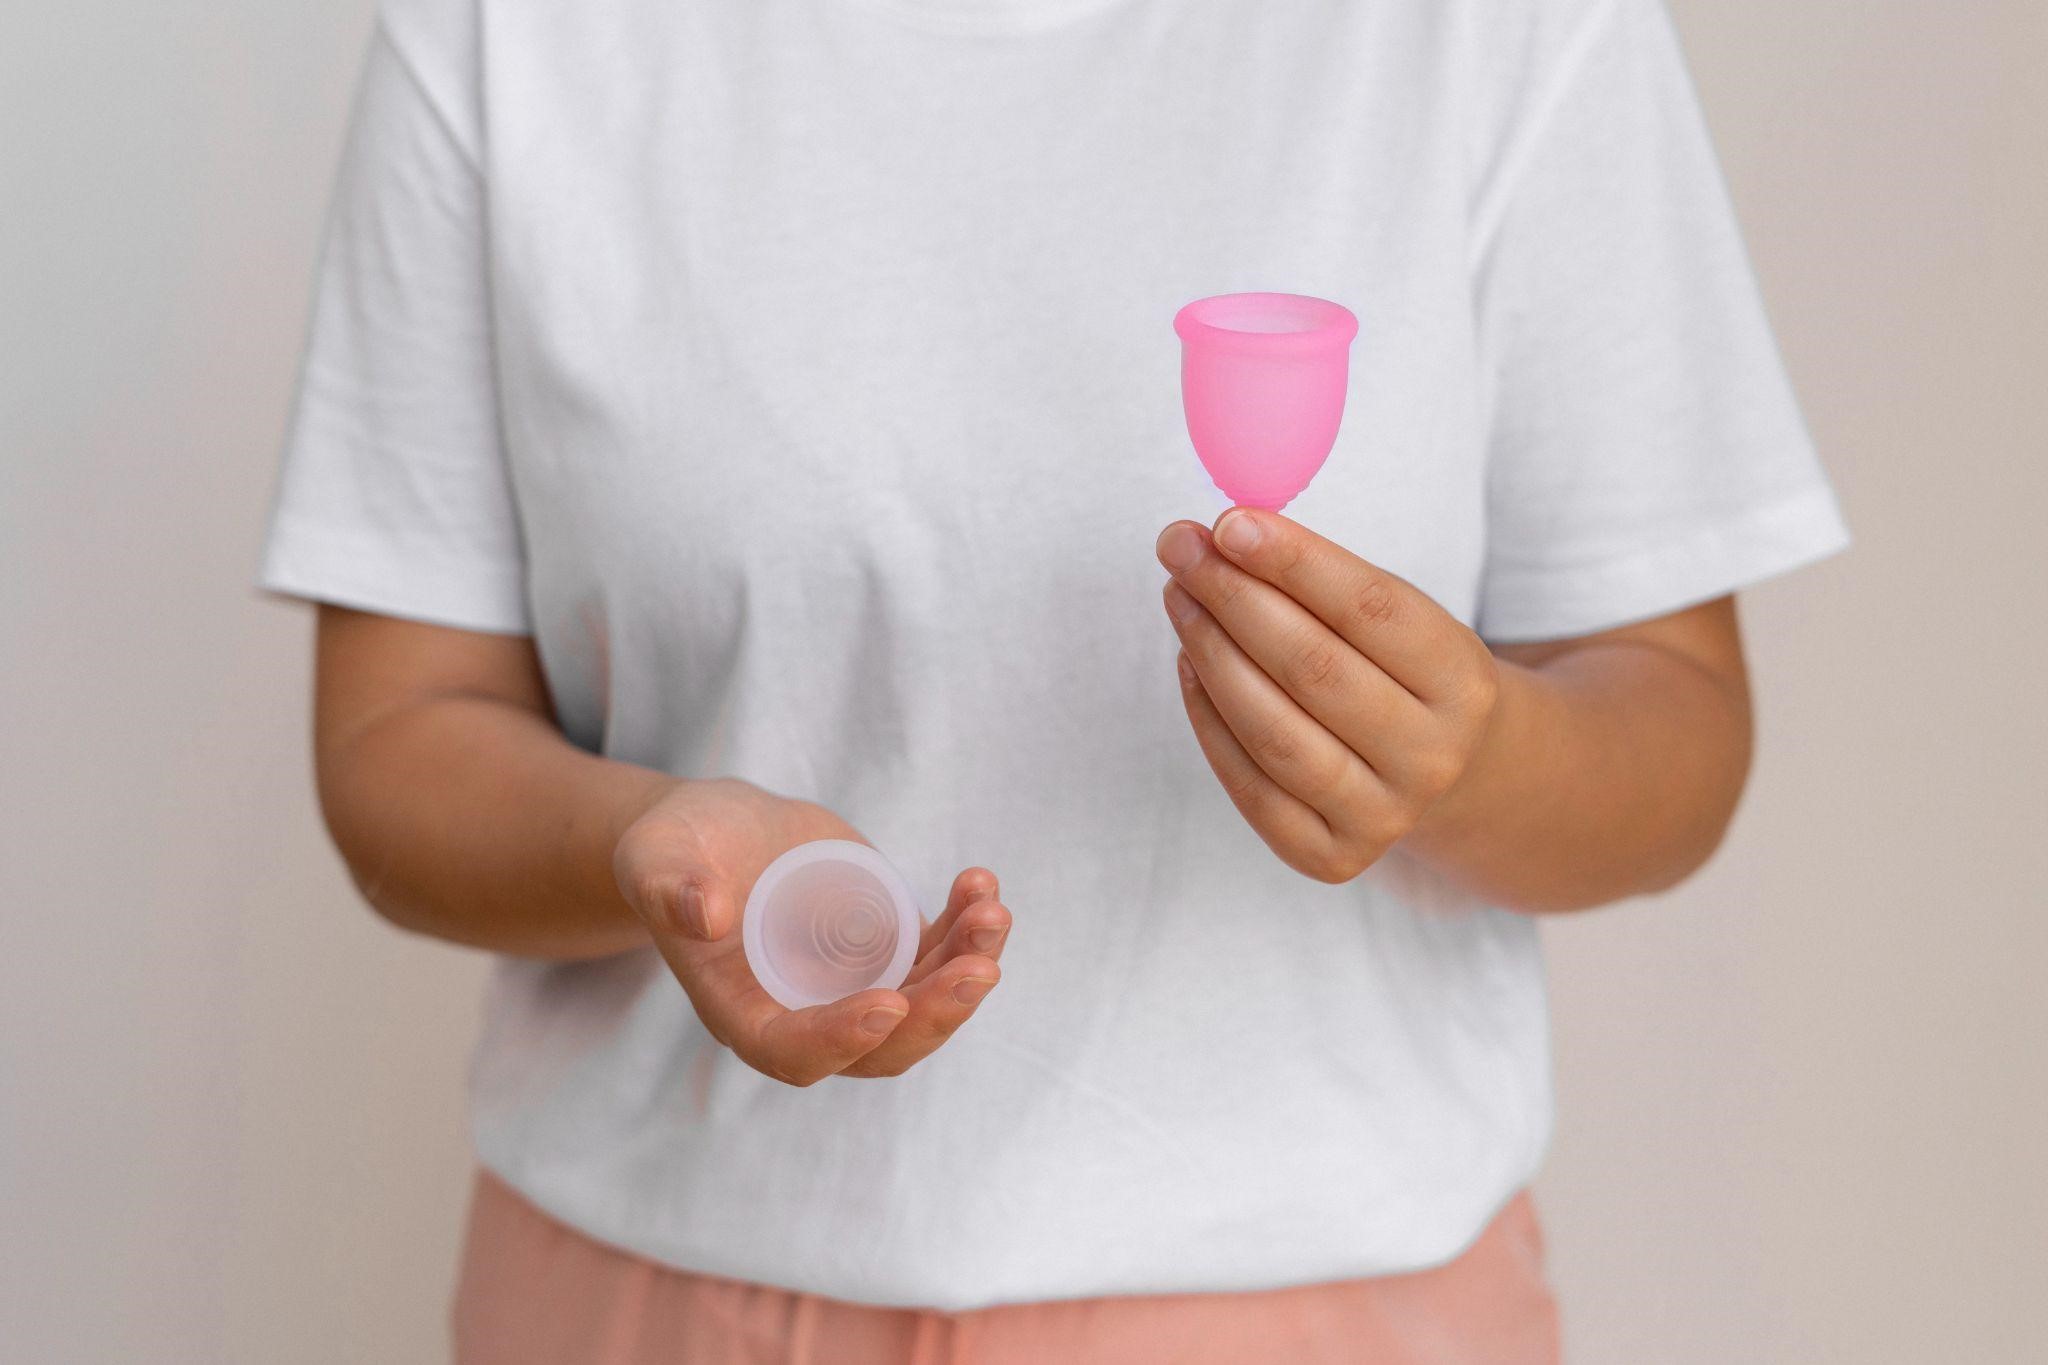 How to Use Menstrual Cups